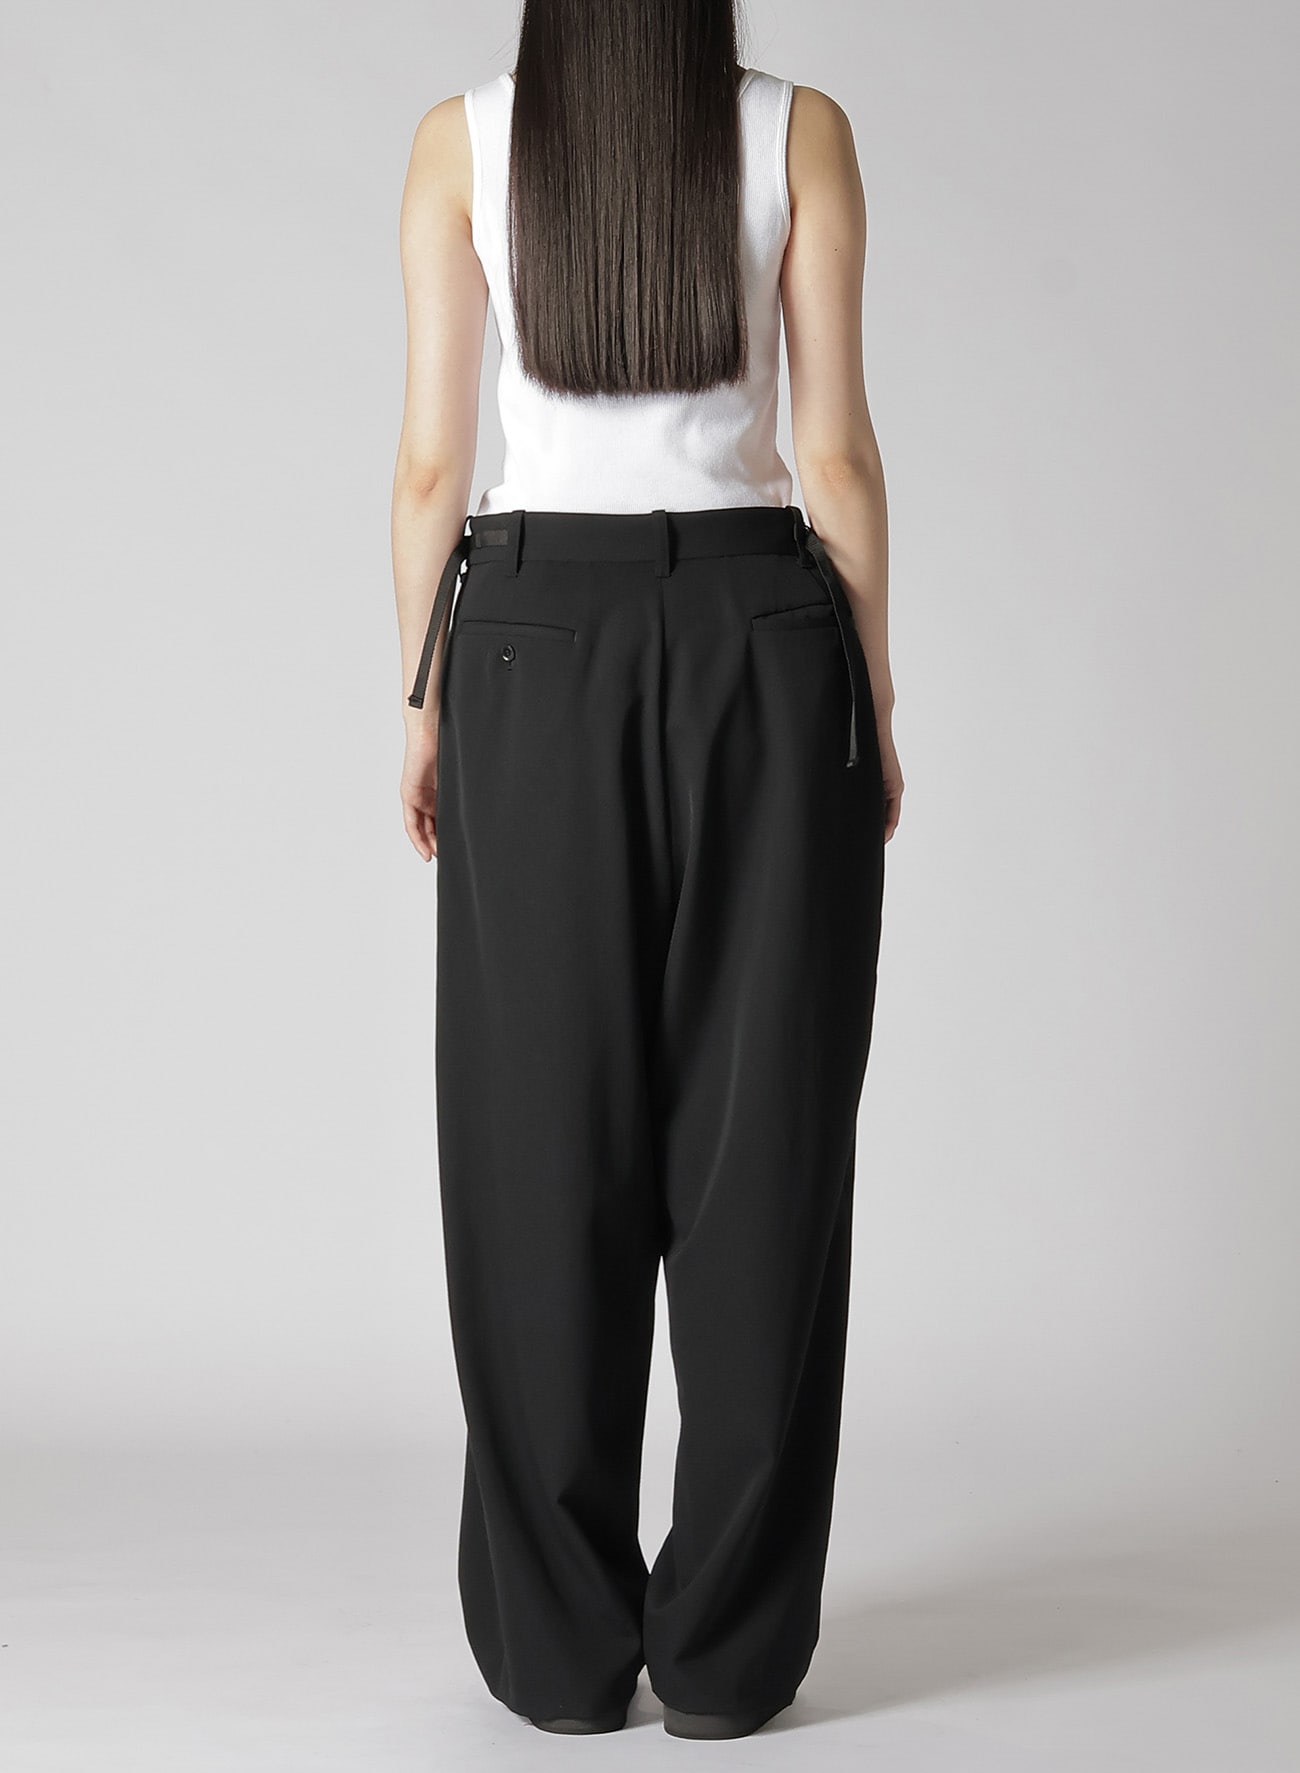 【7/17 12:00(JST) Release】HIGH TWISTED WASHER WOOL GABARDINE SAROUEL PANTS